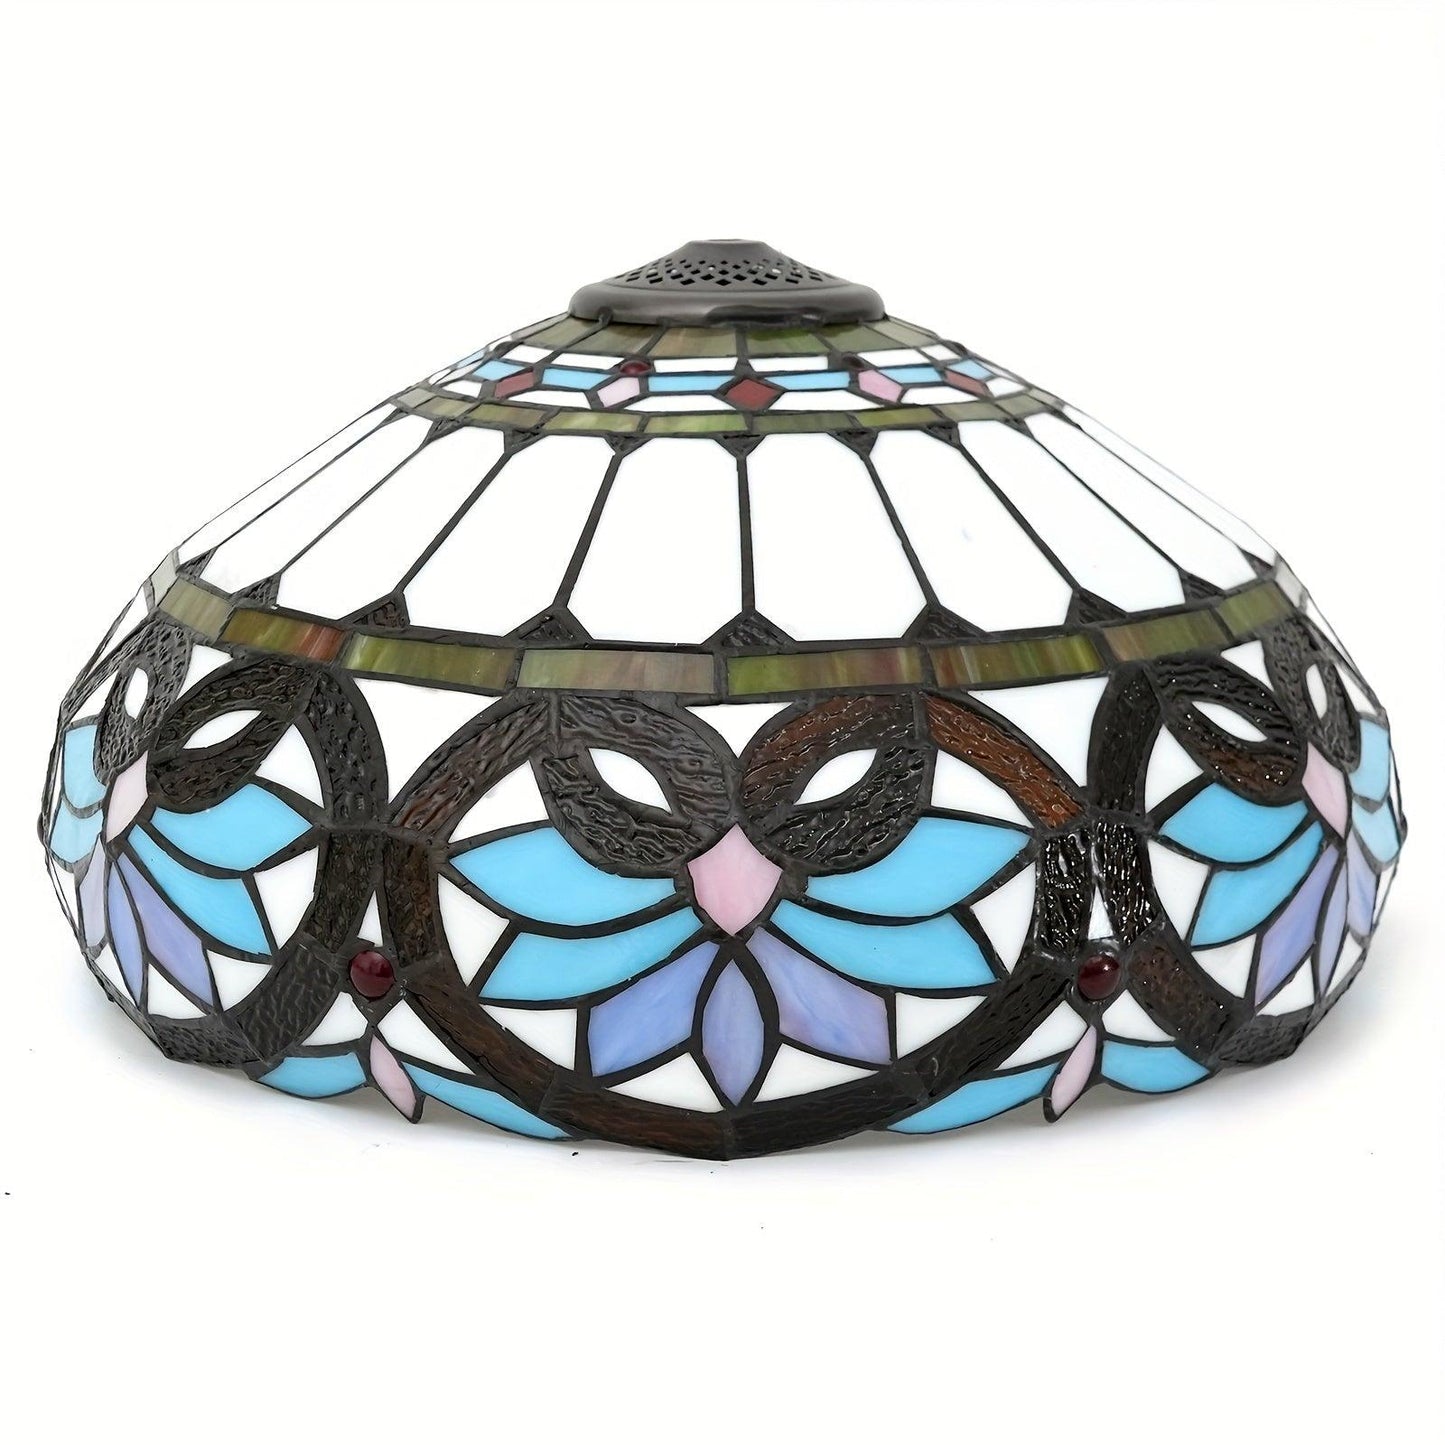 16" Tiffany-Style Stained Glass Lampshade - Dragonfly & Rose Design, Baroque Style For Table Lamps And Chandeliers - Specialty Shades